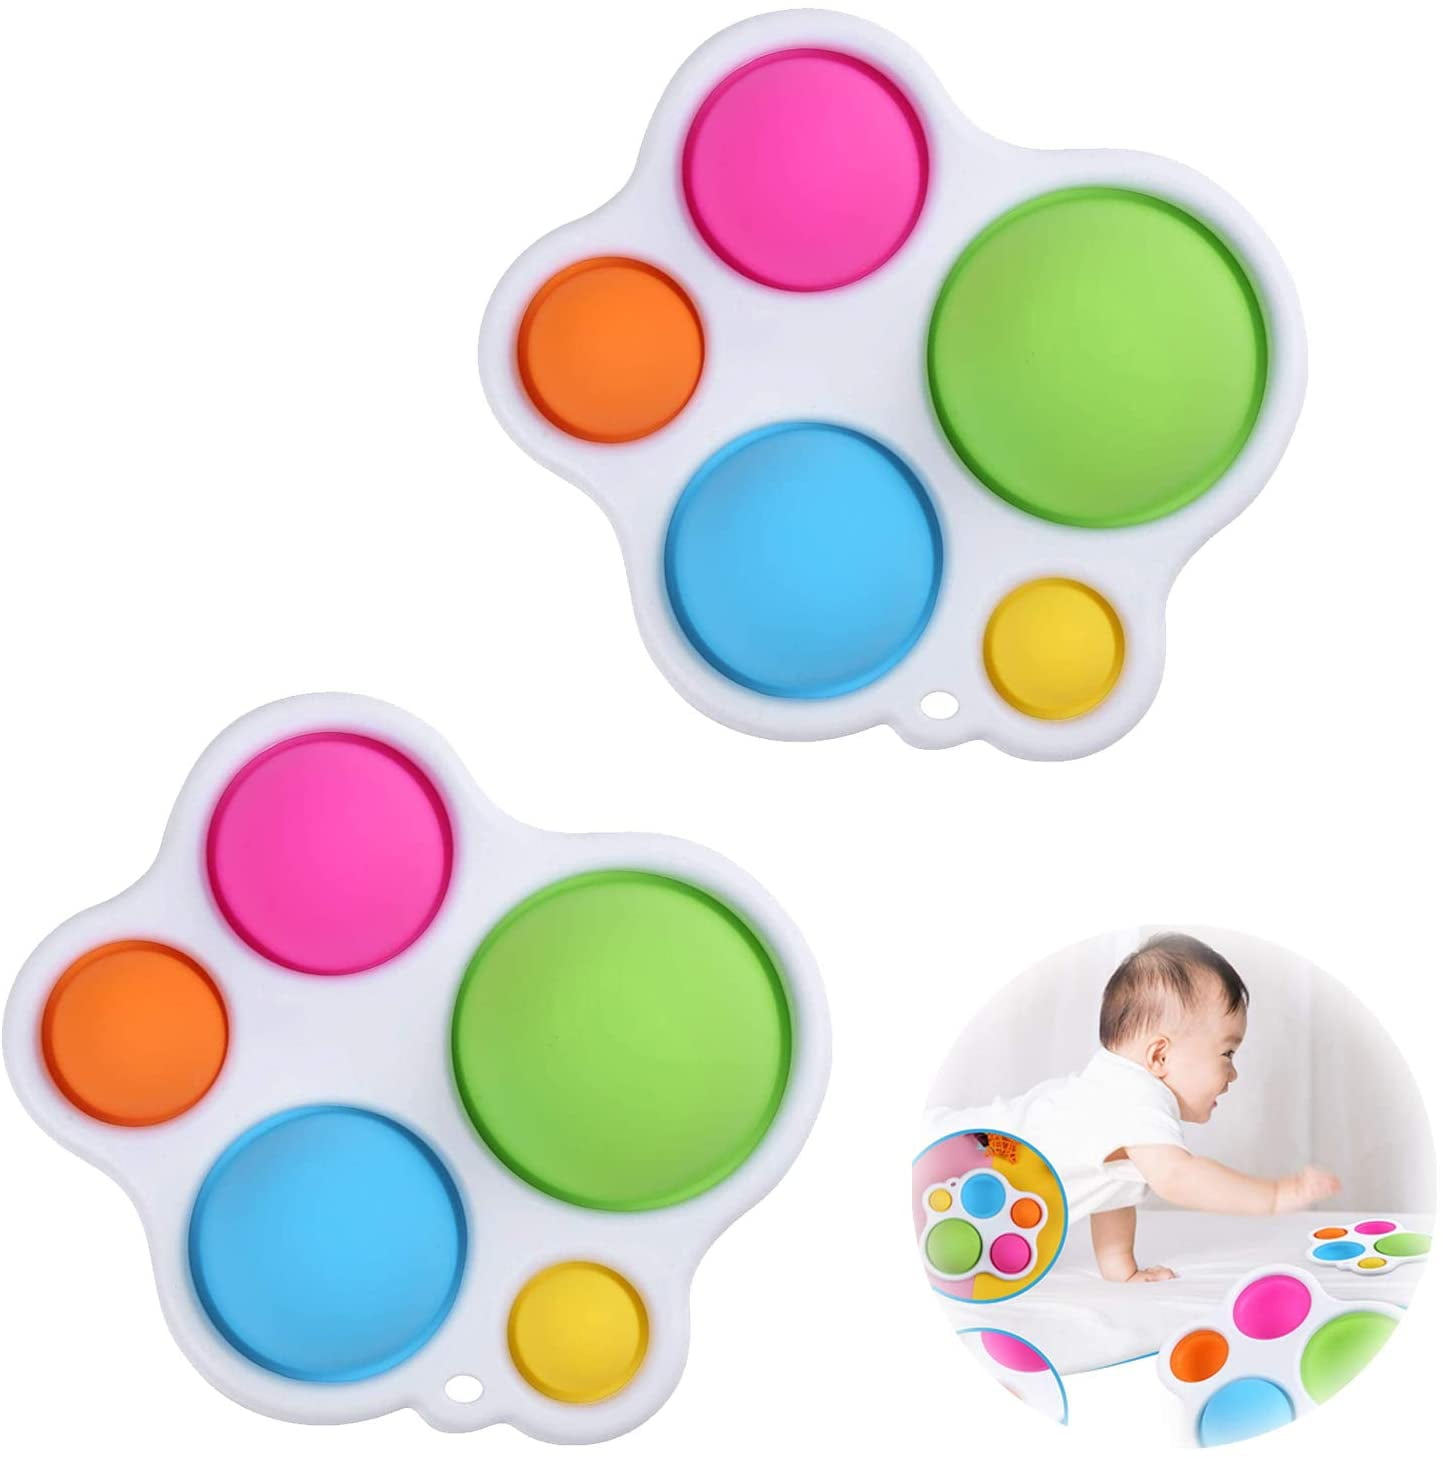 Silicone Flipping Board 0-1 years old Gifts NEW Baby Simple Dimple Sensory Toys 